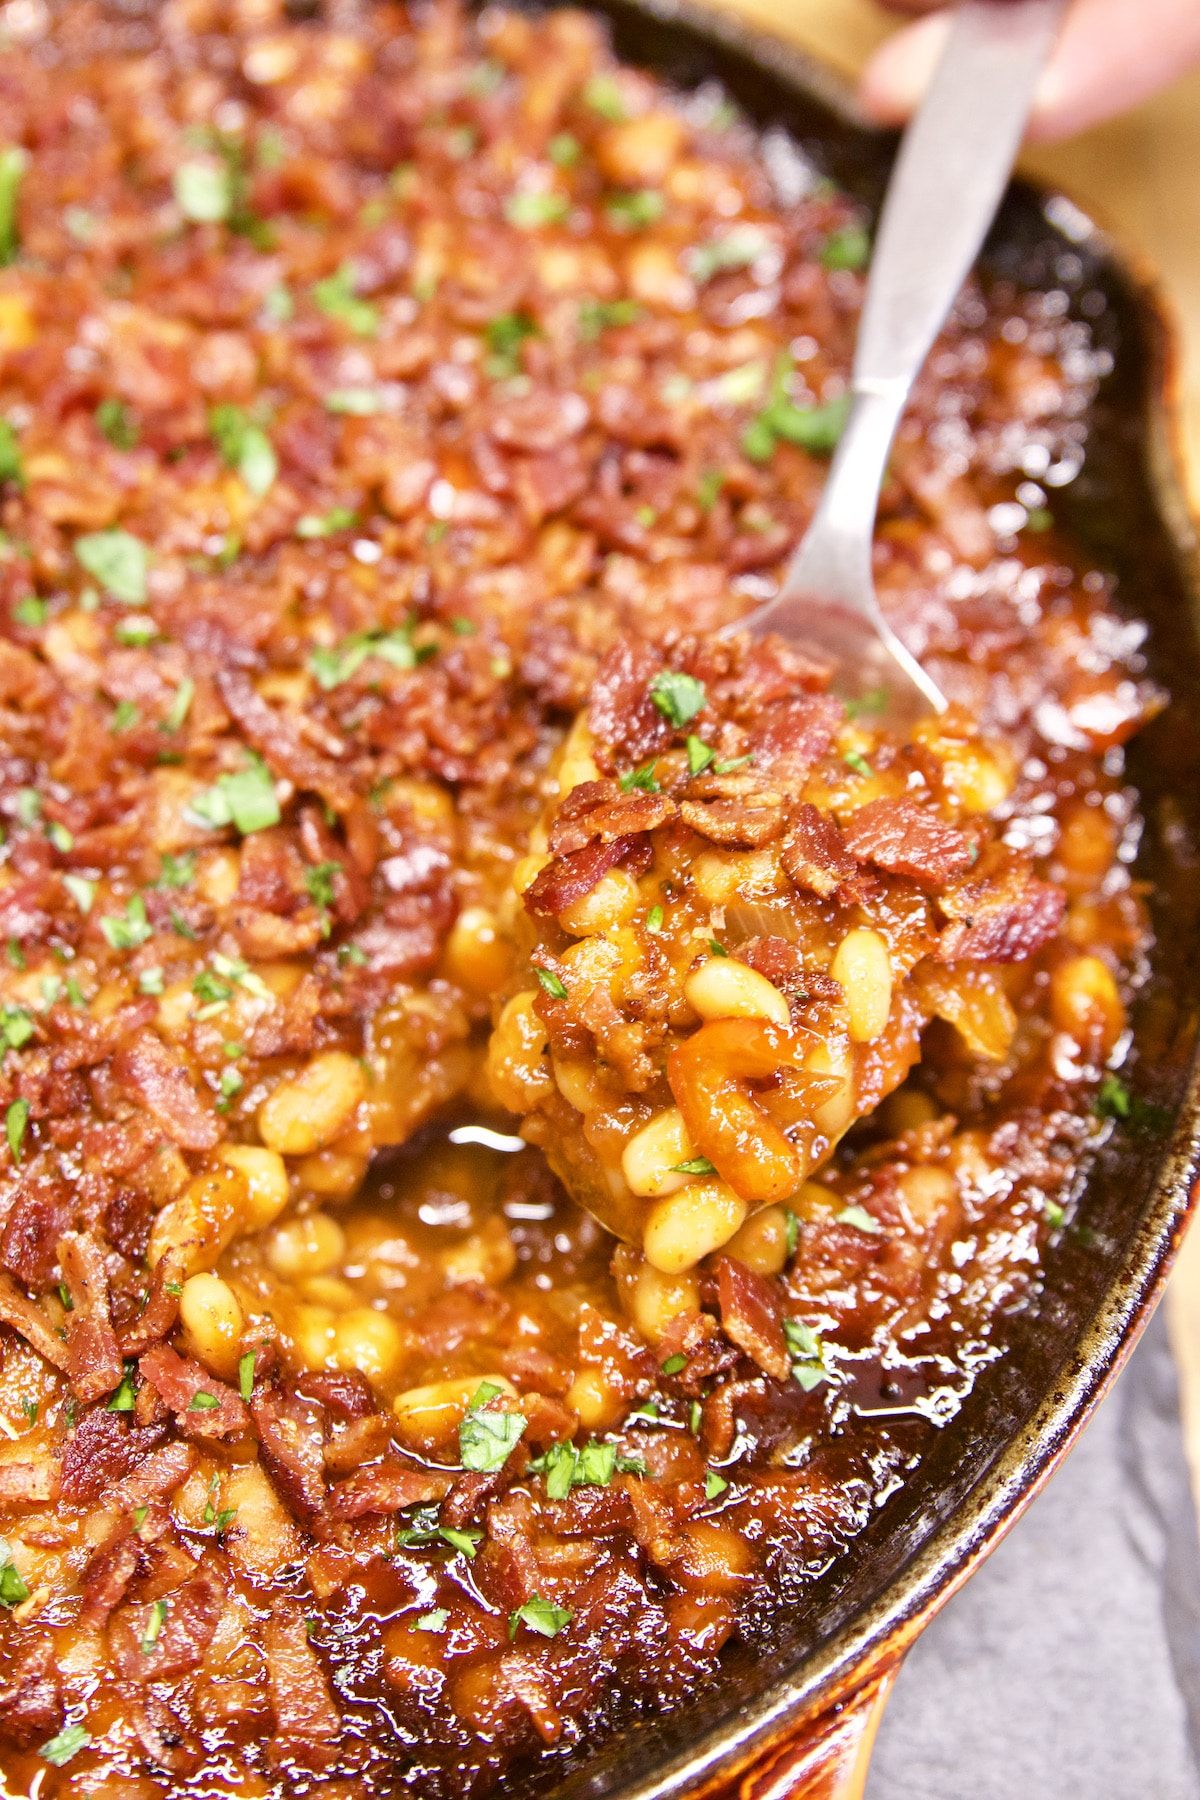 Skillet of baked beans with spoon.